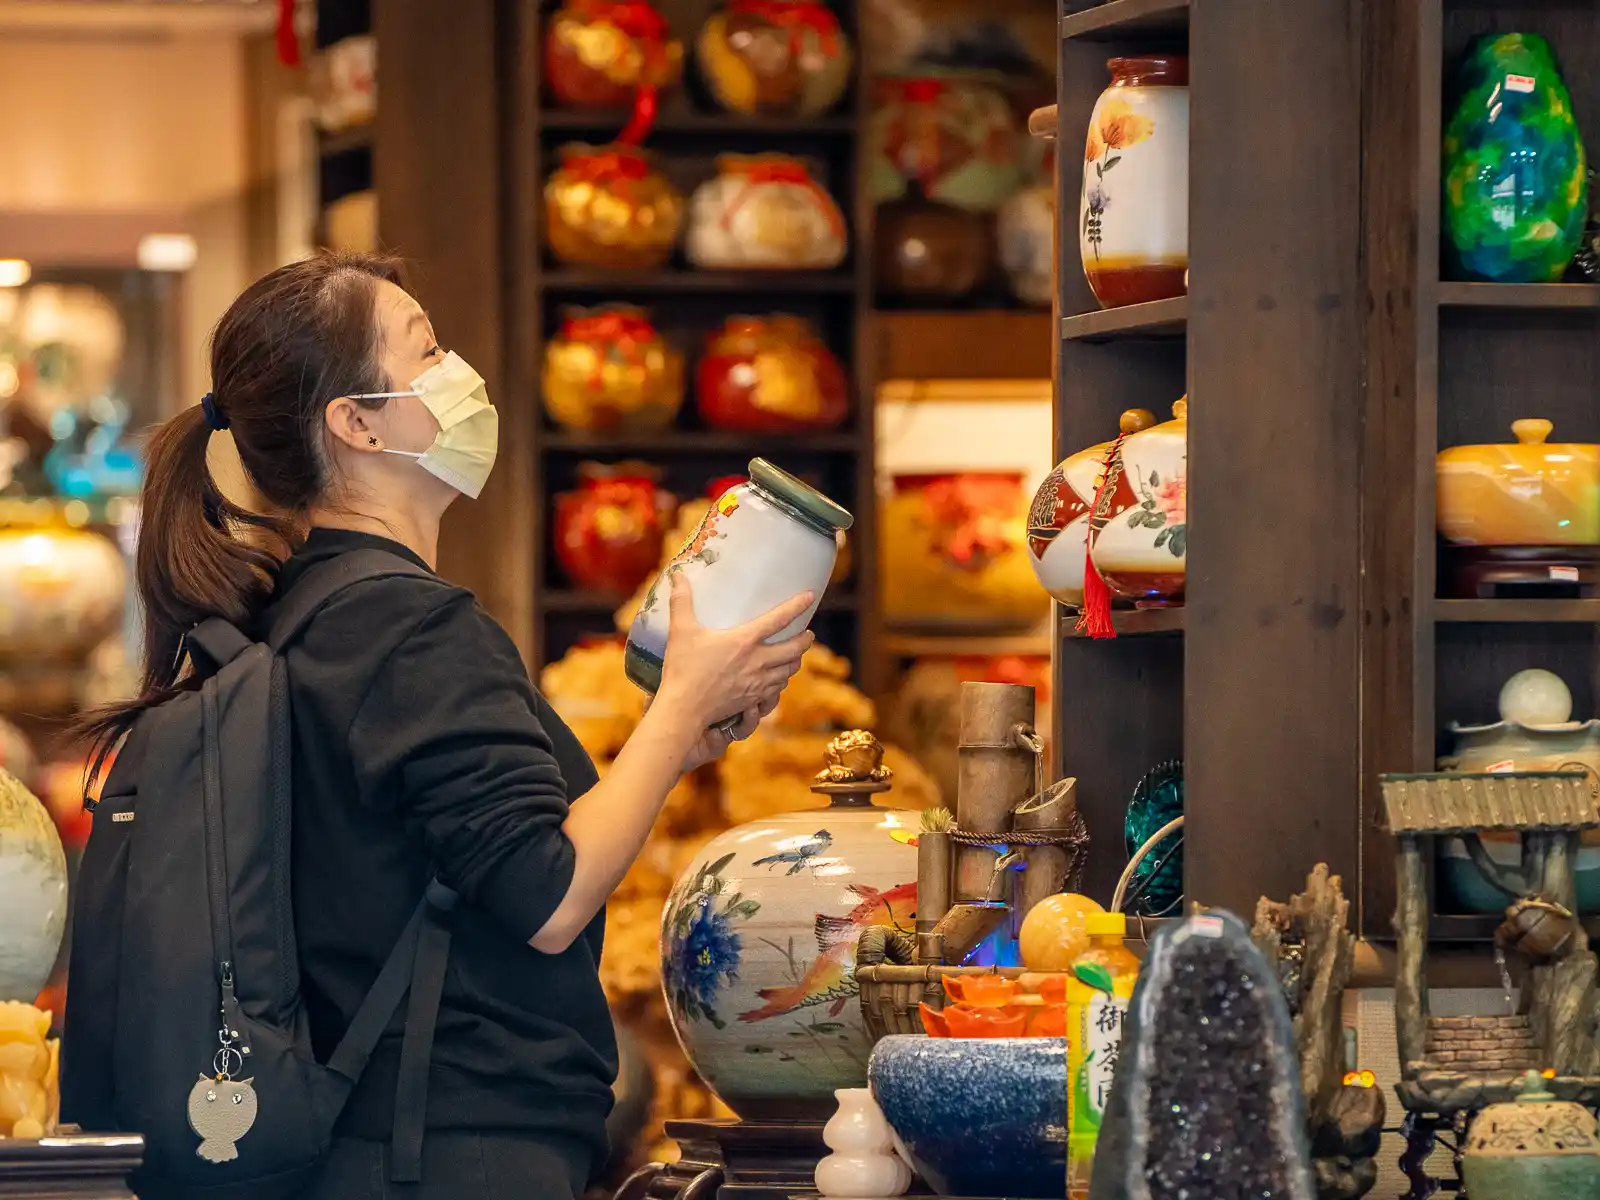 A tourist examines a vase in a pottery shop in Yingge.